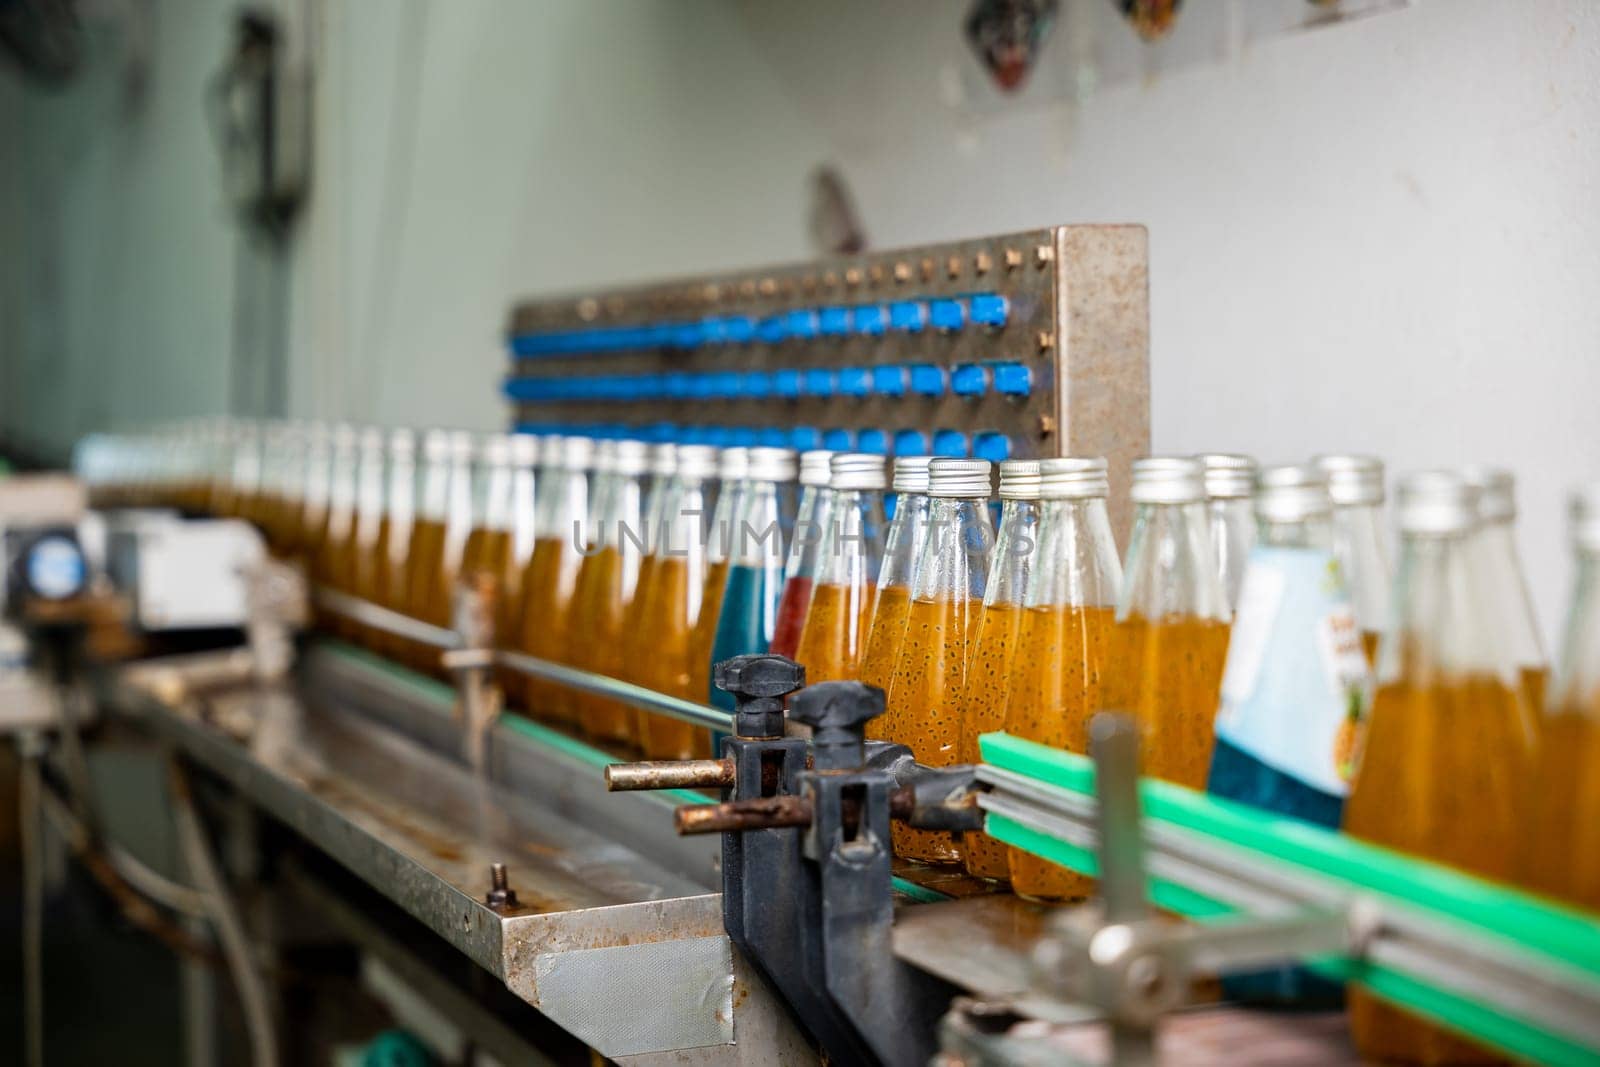 Transparent bottles move along a conveyor belt in the beverage factory filling up with organic basil seed drinks mixed with pomegranate. This clean automated manufacturing guarantees quality.